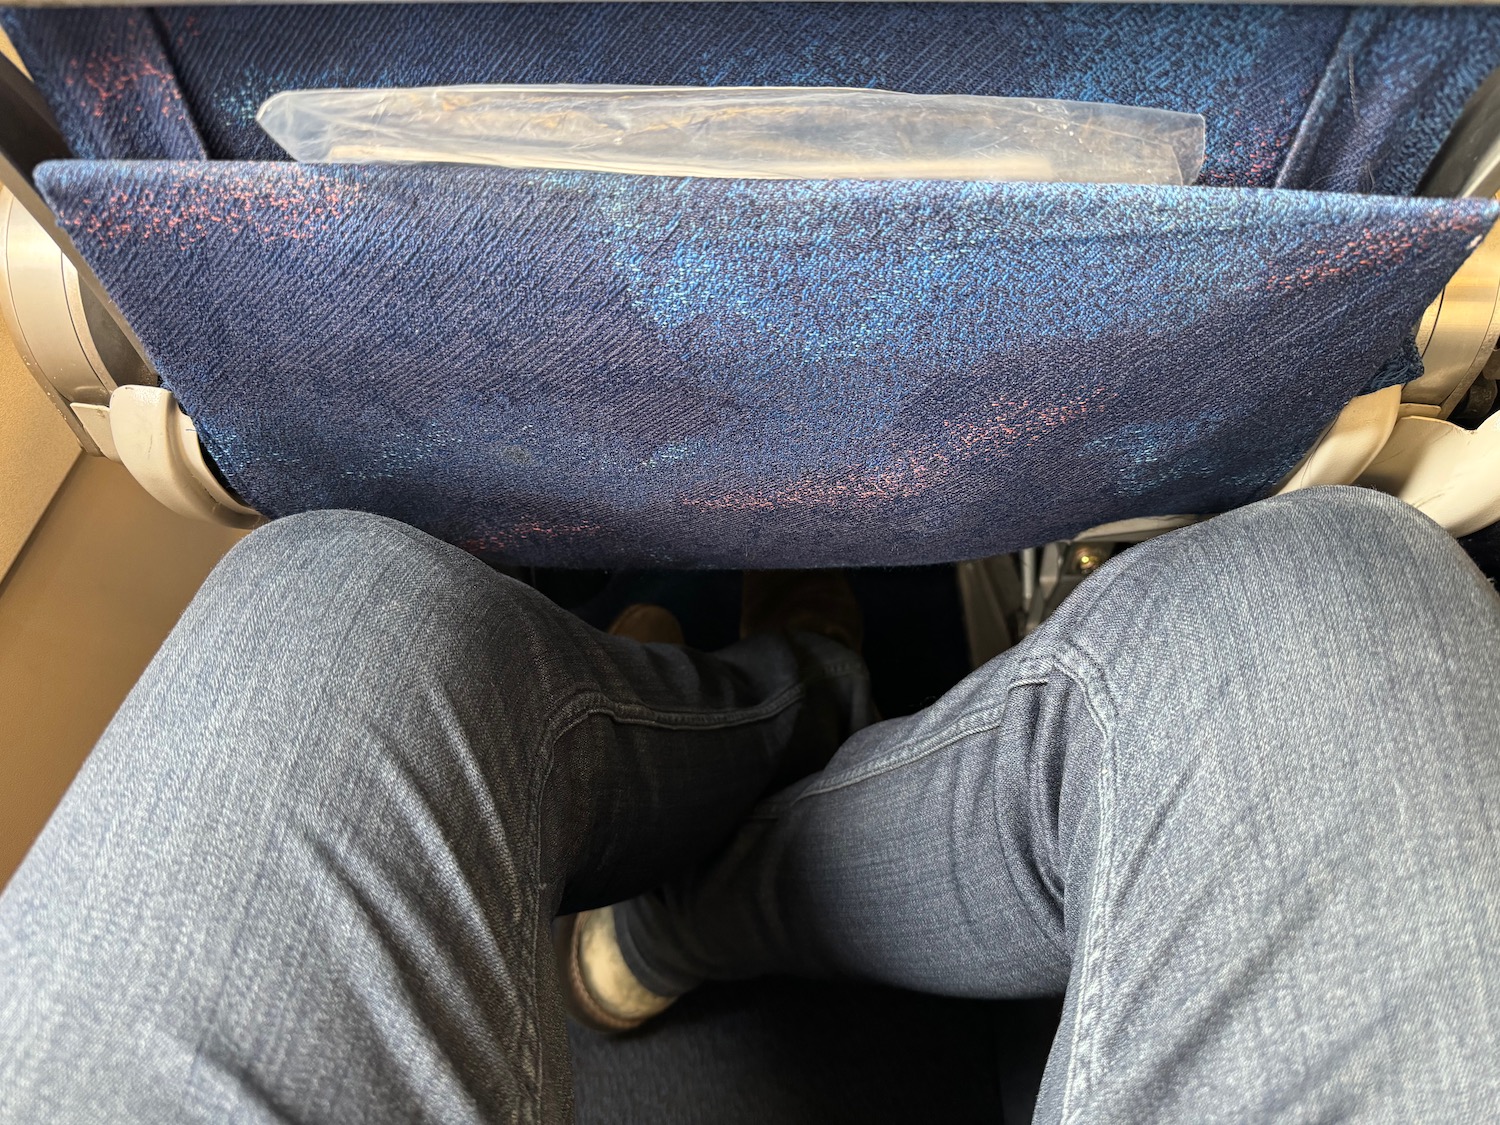 a person's legs in a blue seat